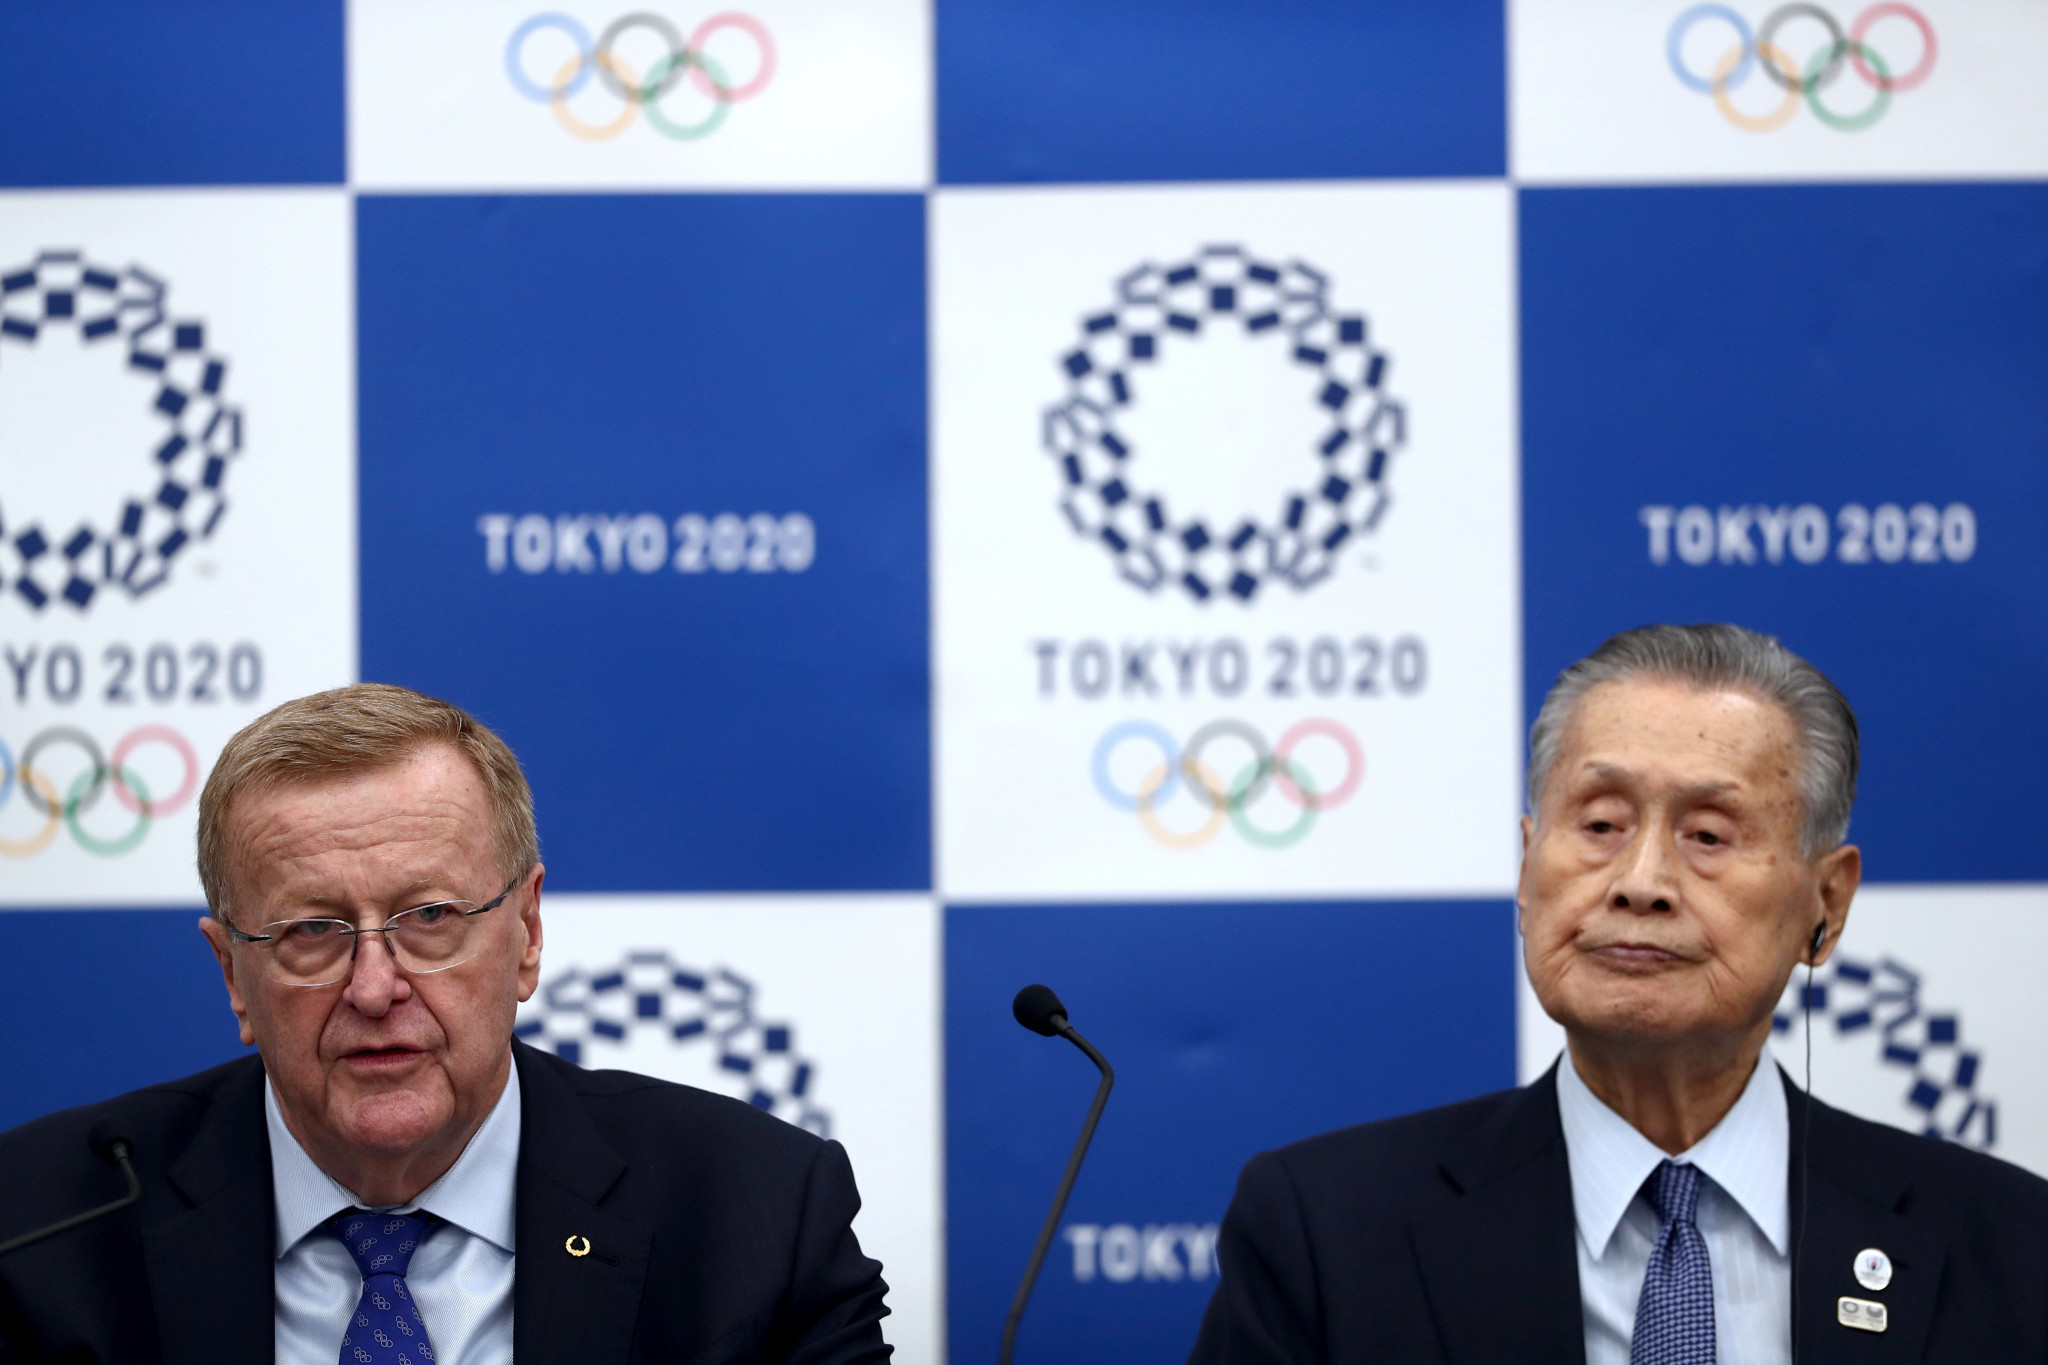 Tickets for the marathon will not be available with further details of its move to Sapporo to be decided before they can be released to the Japanese public ©Getty Images